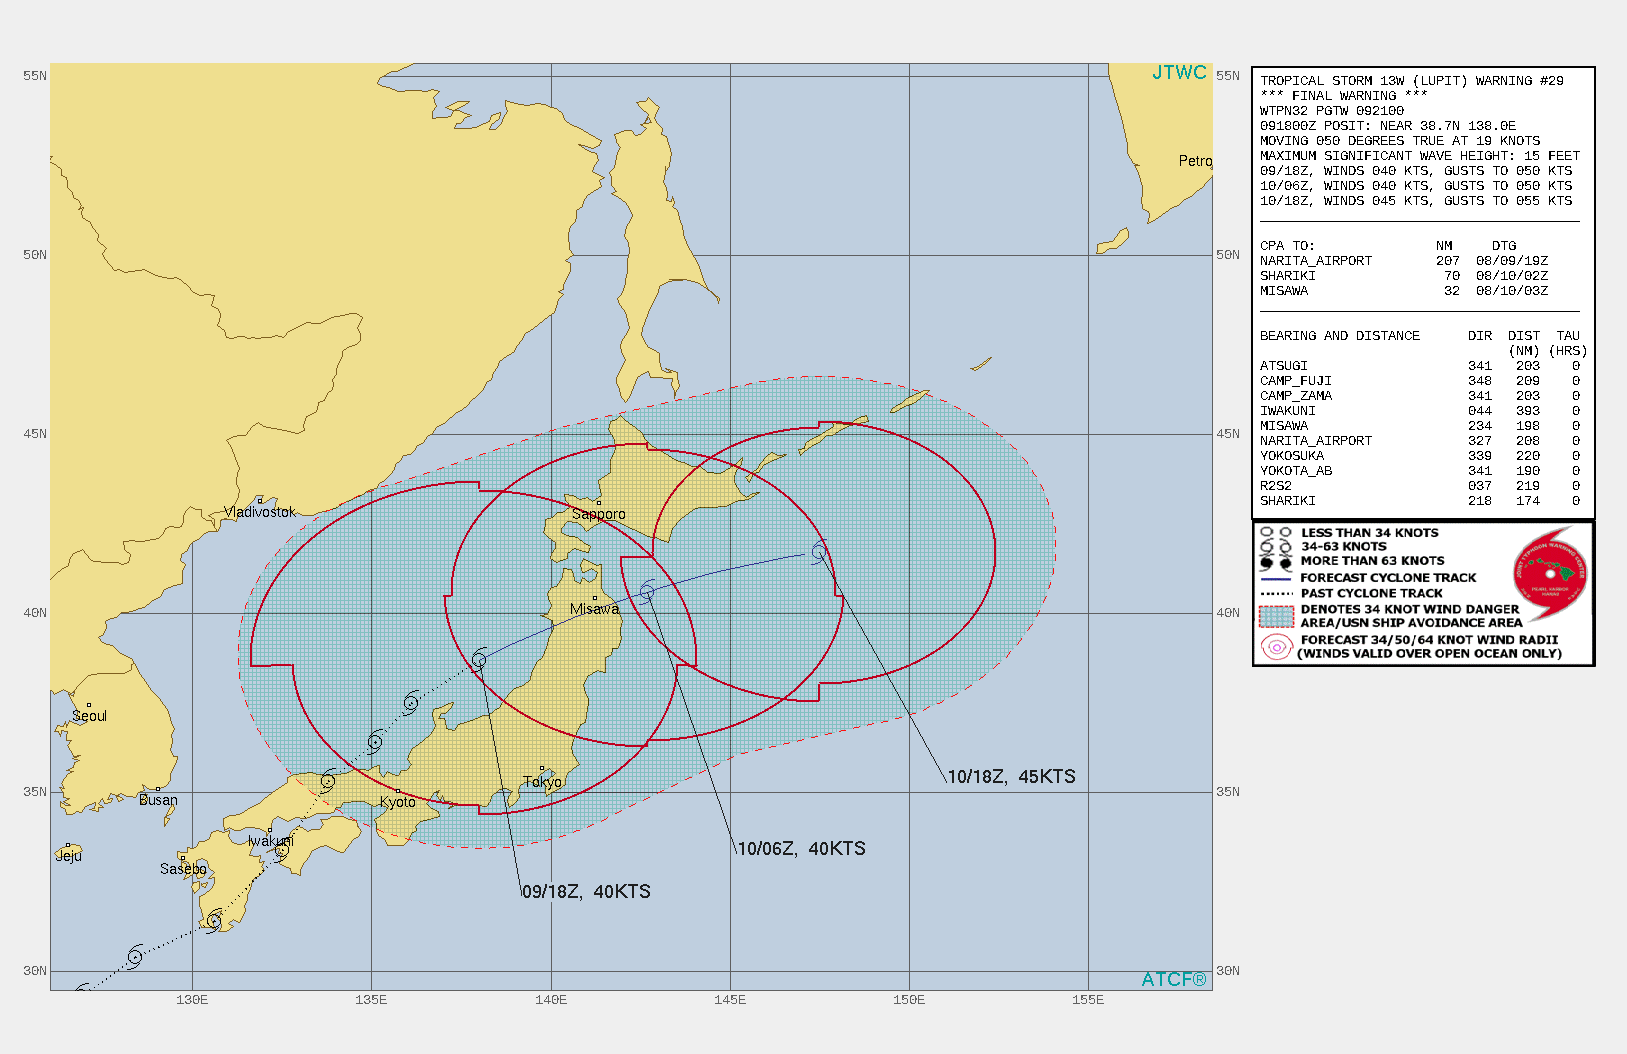 TS 13W(LUPIT). WARNING 29/FINAL ISSUED AT 09/21UTC.